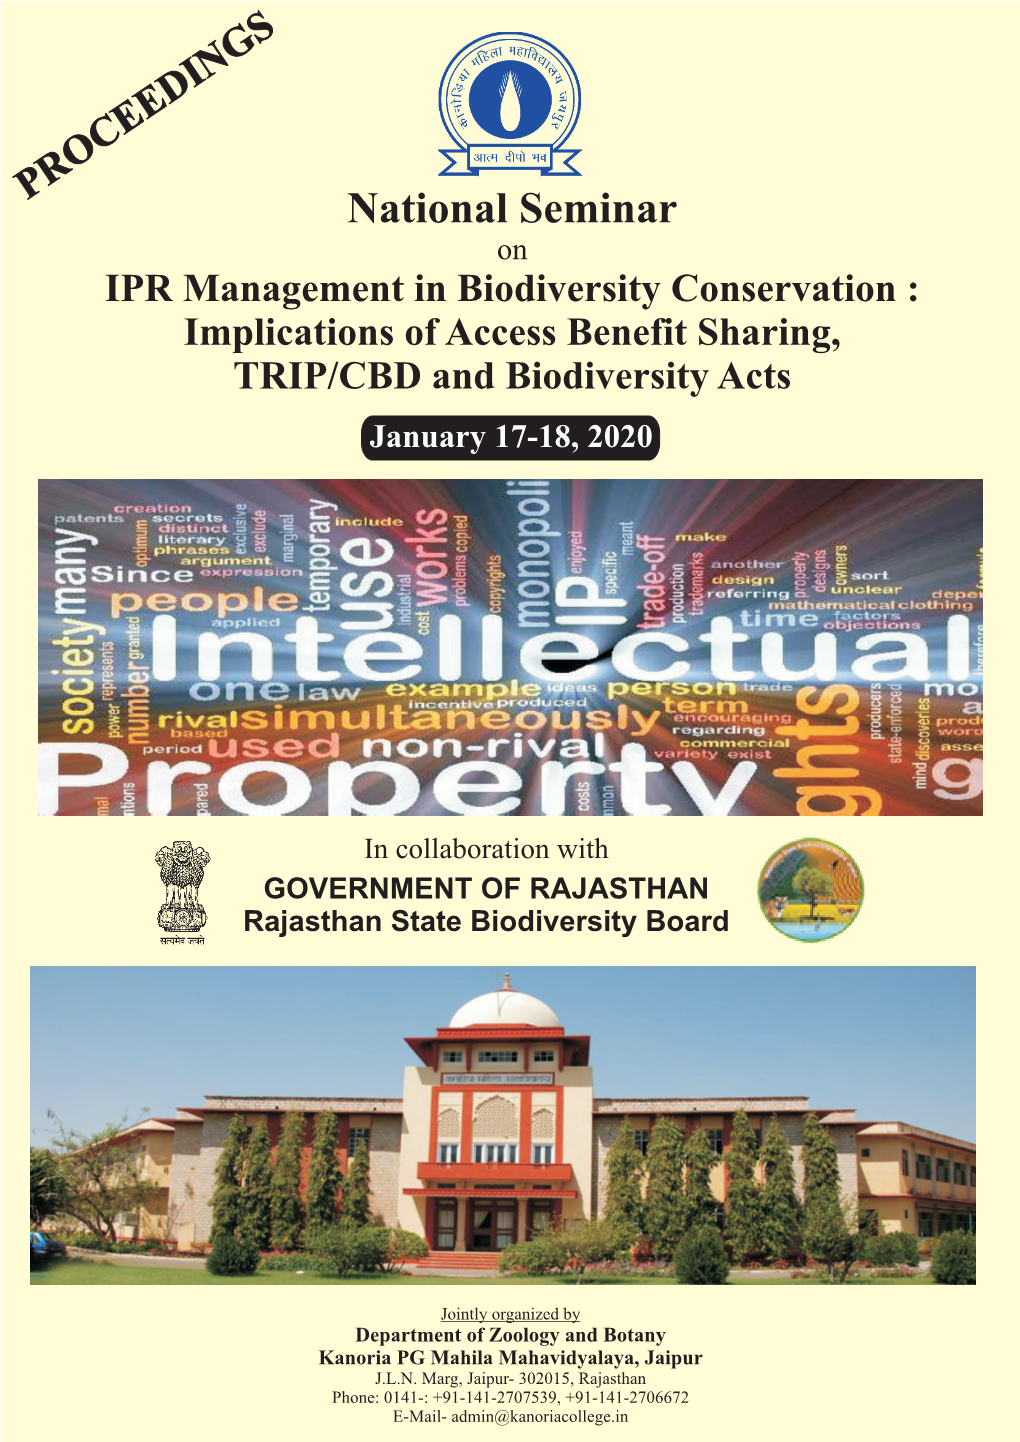 National Seminar on IPR Management in Biodiversity Conservation : Implications of Access Benefit Sharing, TRIP/CBD and Biodiversity Acts January 17-18, 2020